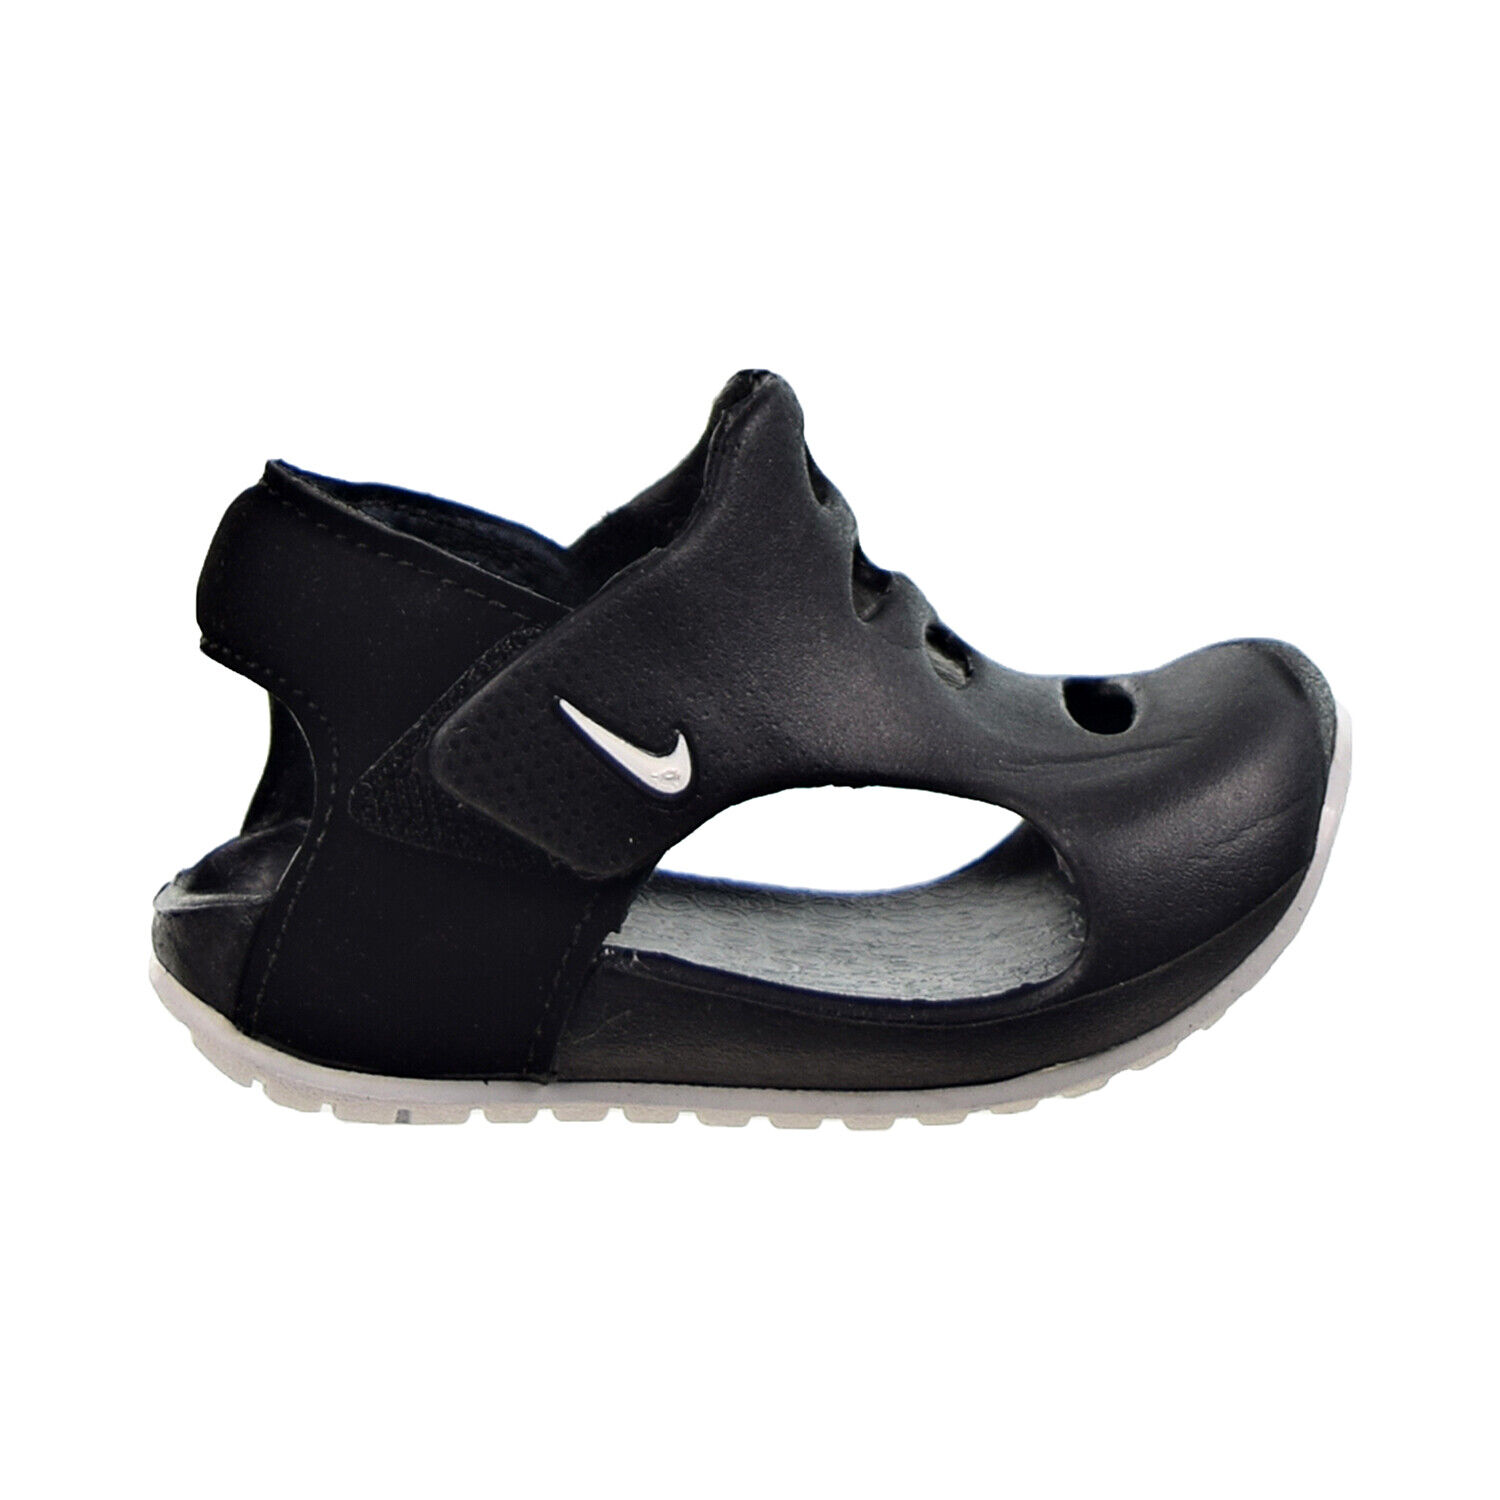 Are These The Best Nike Sunray Sandals For Adults. : 9 Game-Changing Reasons to Buy Nike Sunray Sandals Now